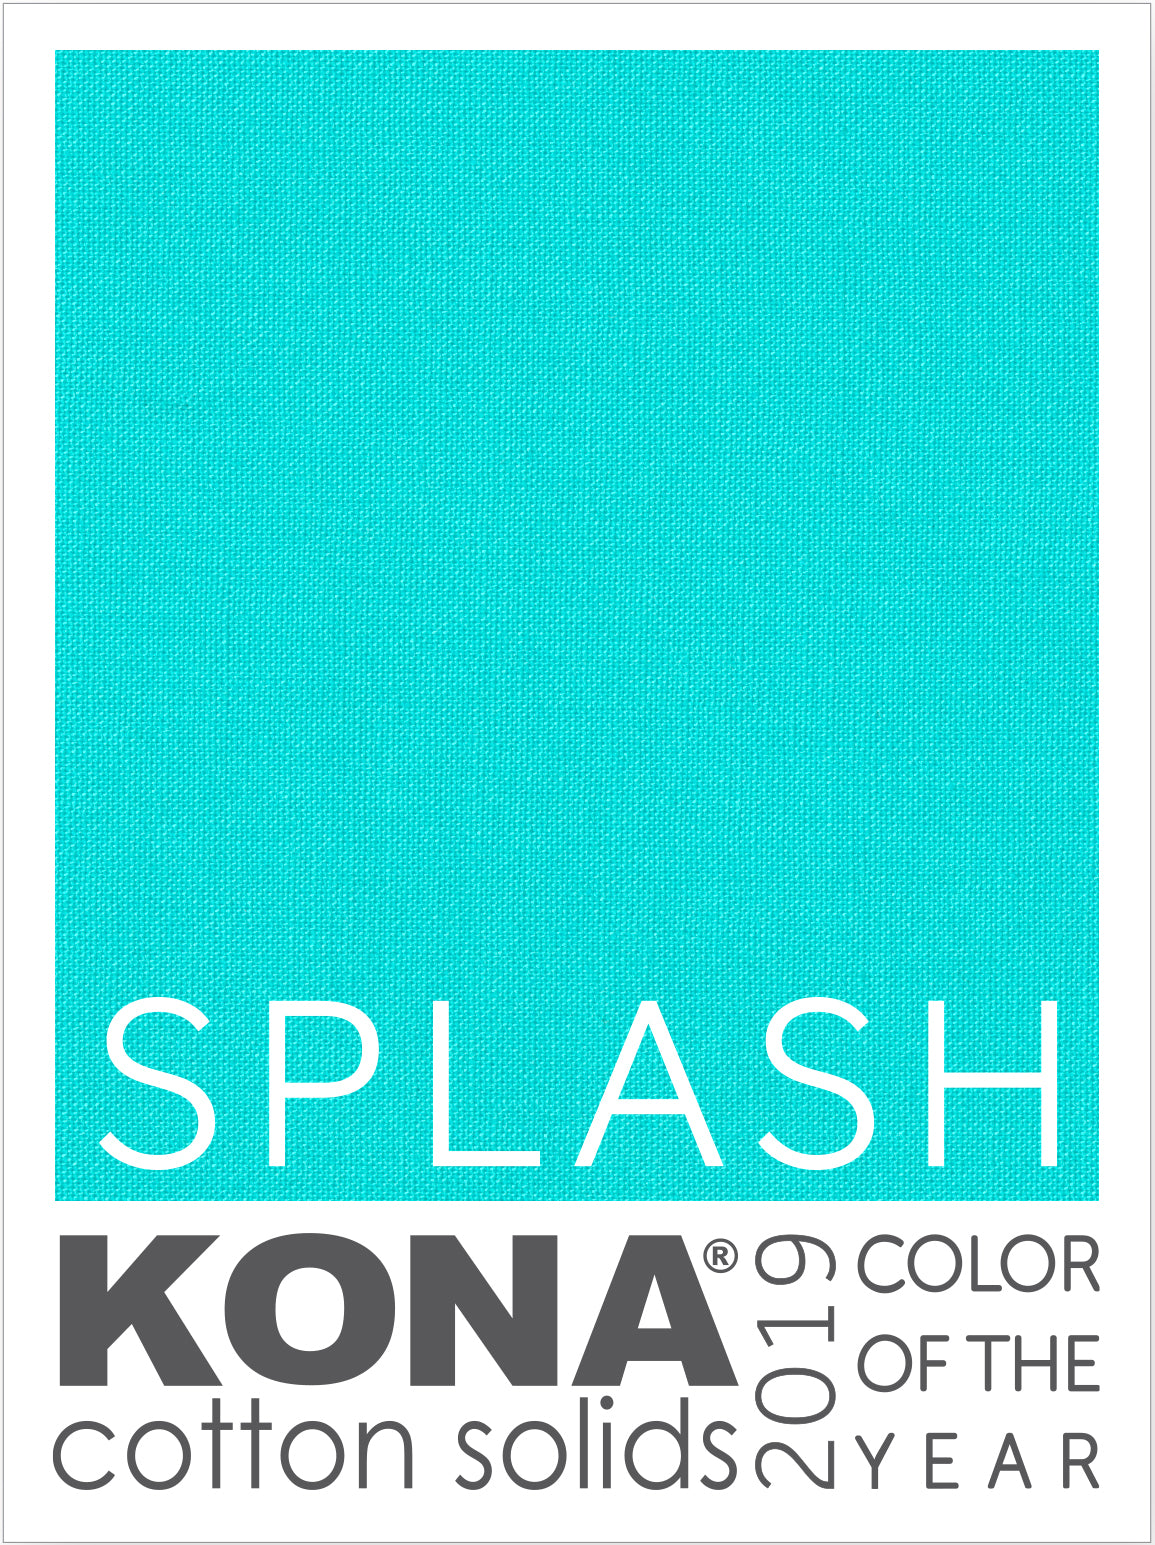 Kona Cotton - Turquoise 15 yd BoltQuilting Fabric